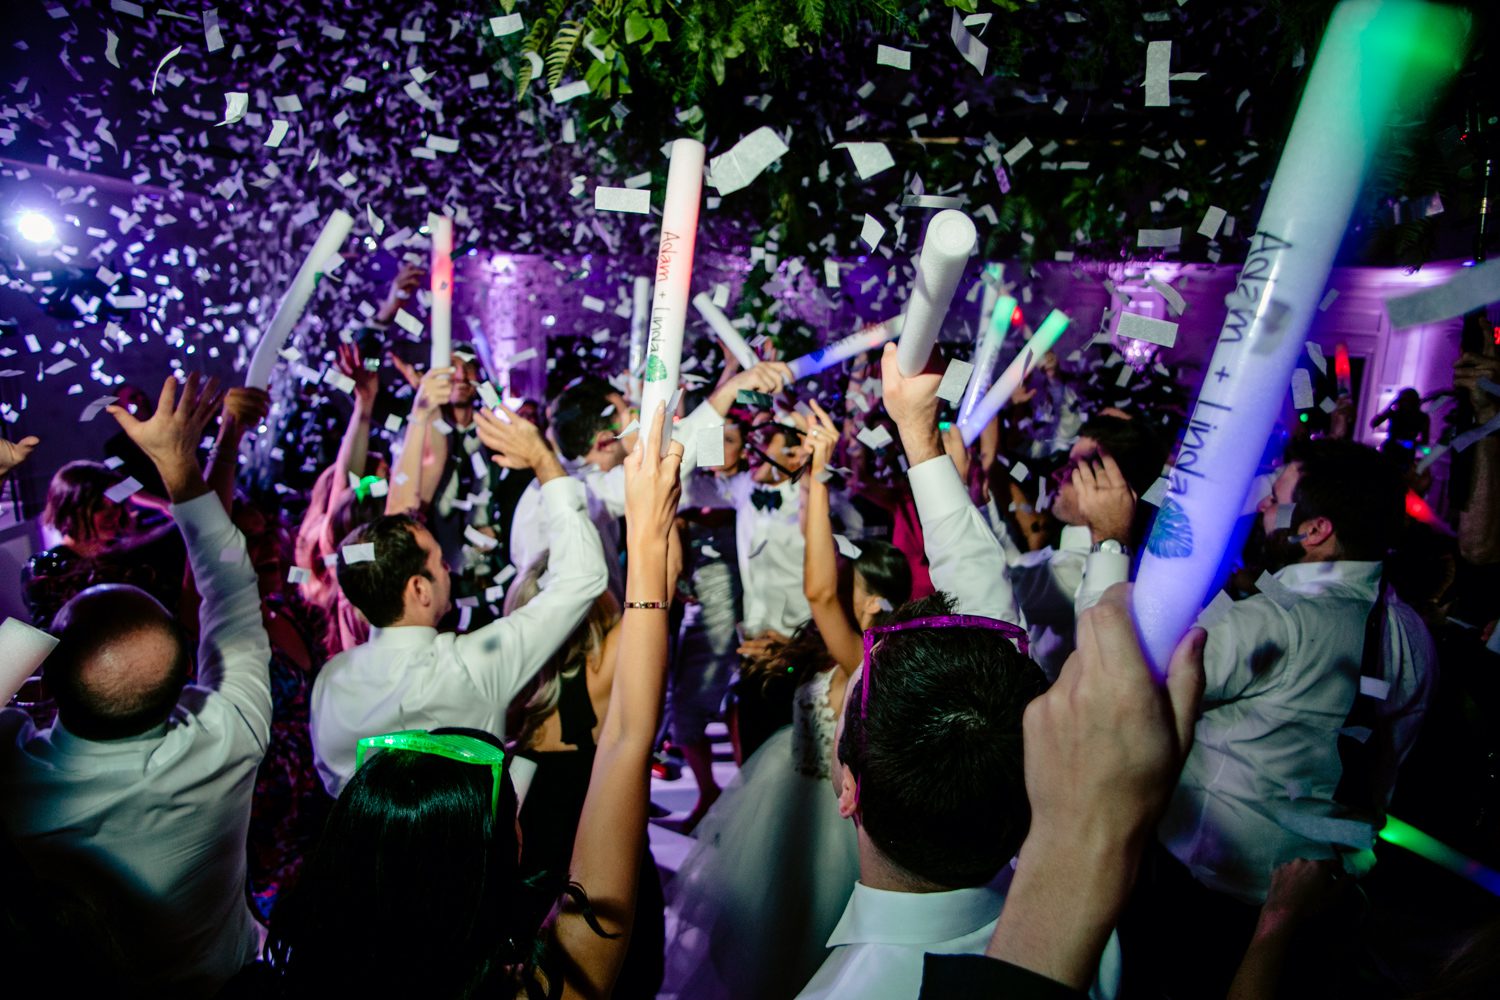 A group of Jewish people holding confetti sticks at a wedding reception in Miami, FL.